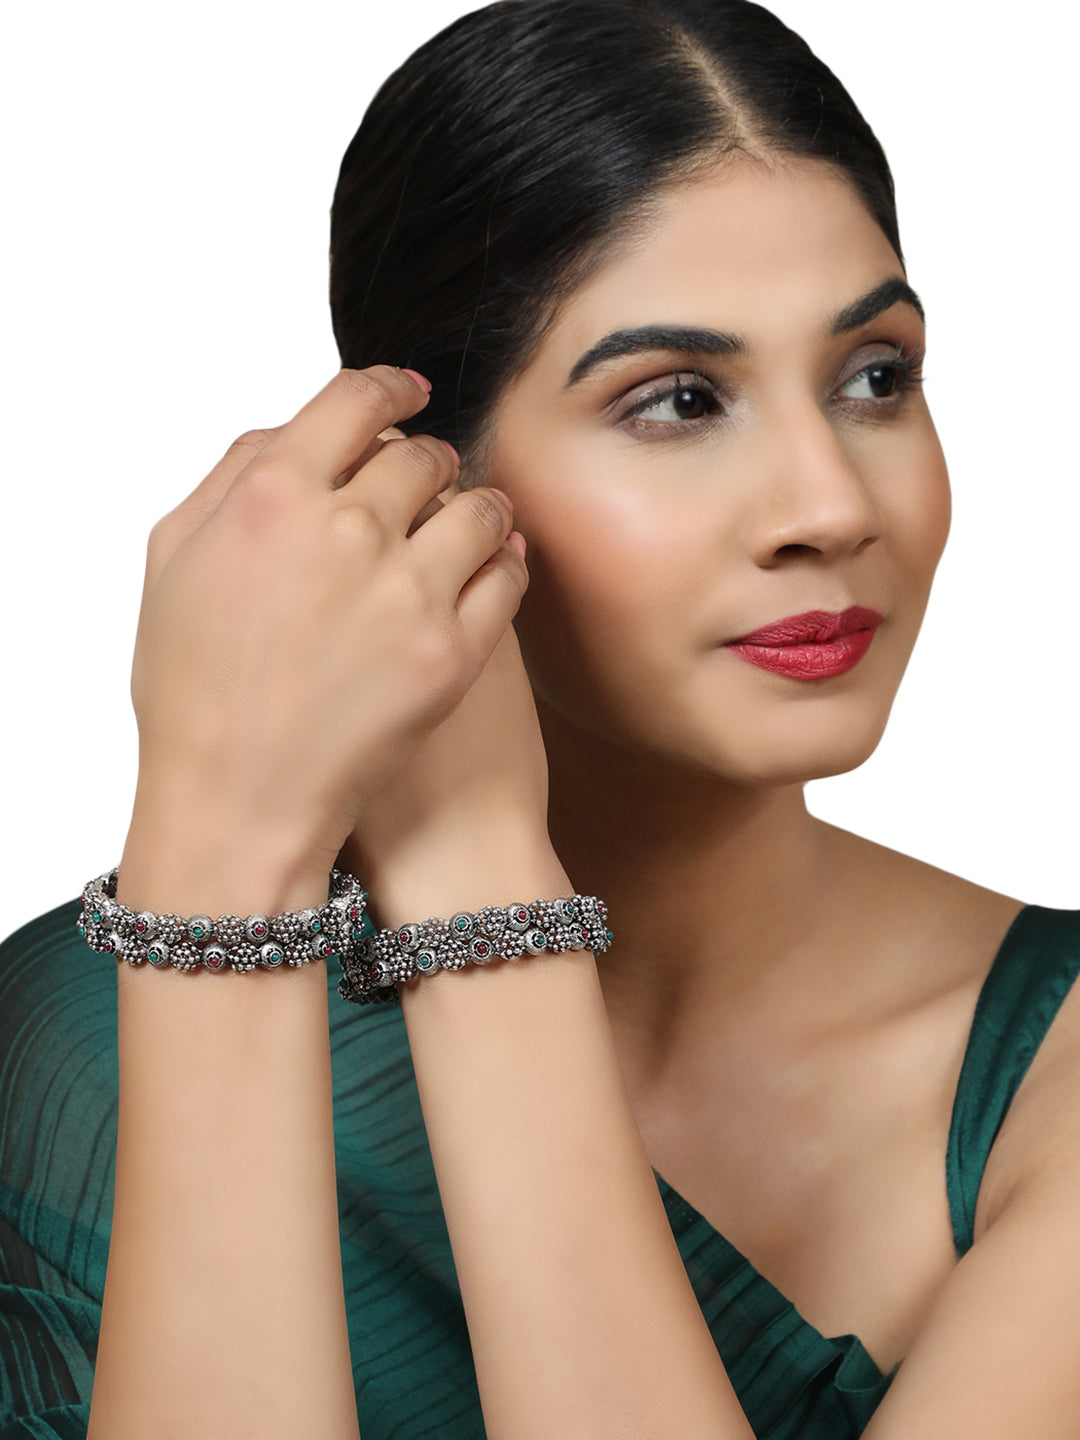 Women's Set Of 4 Oxidised Silver-Plated Pink Ruby and Green Stone Studded Handcrafted Bangles - Anikas Creation